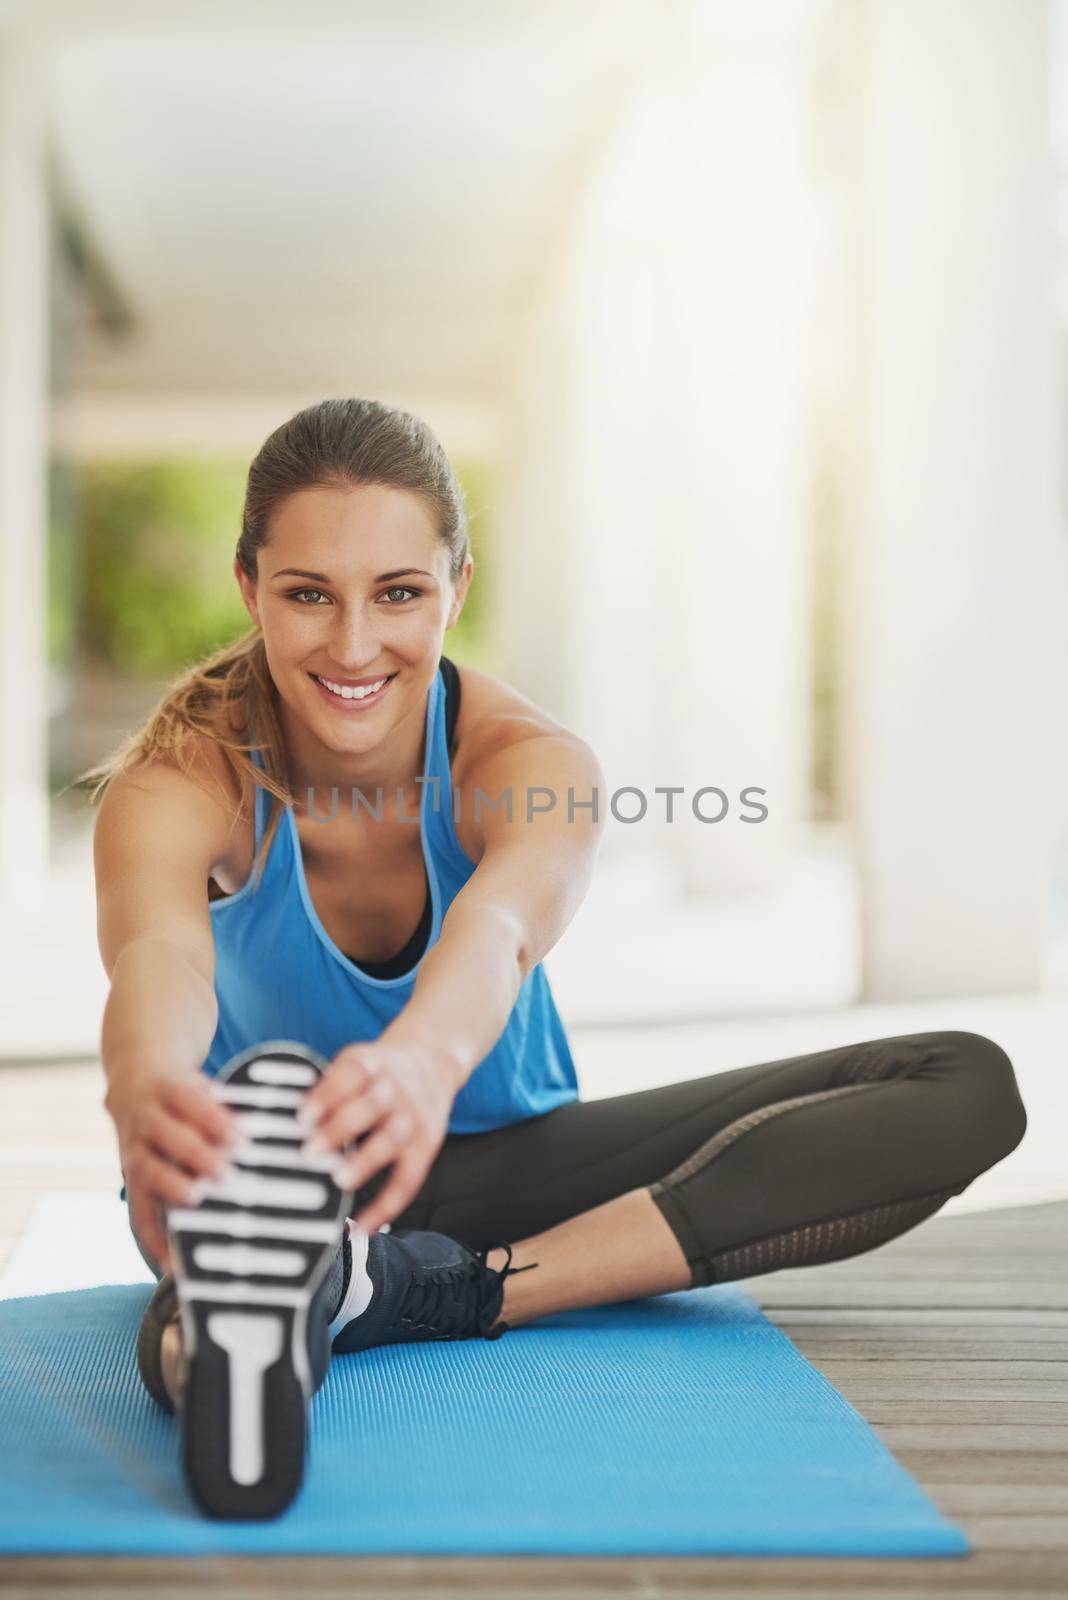 Before every workout, stretch. Portrait of an attractive young woman stretching before her workout